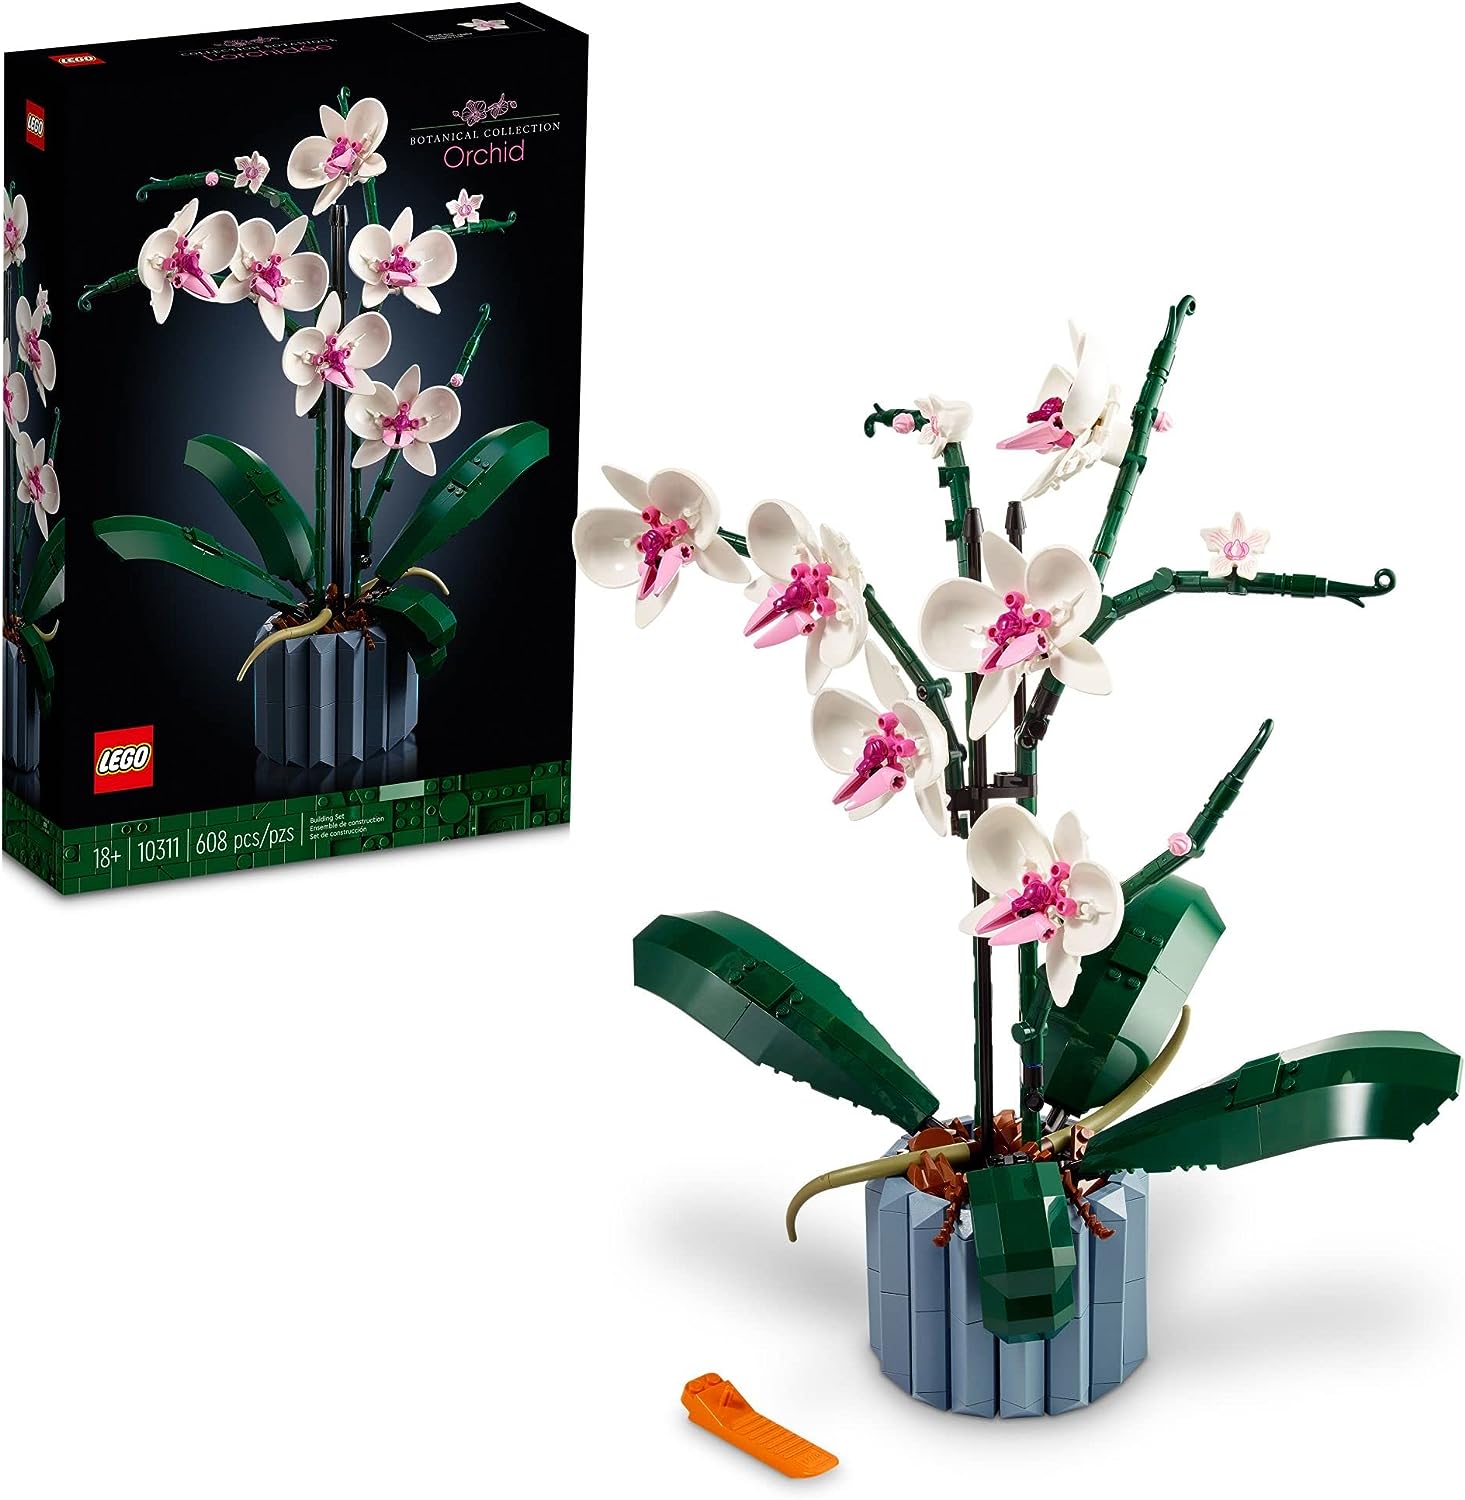 Lego orchid set with box